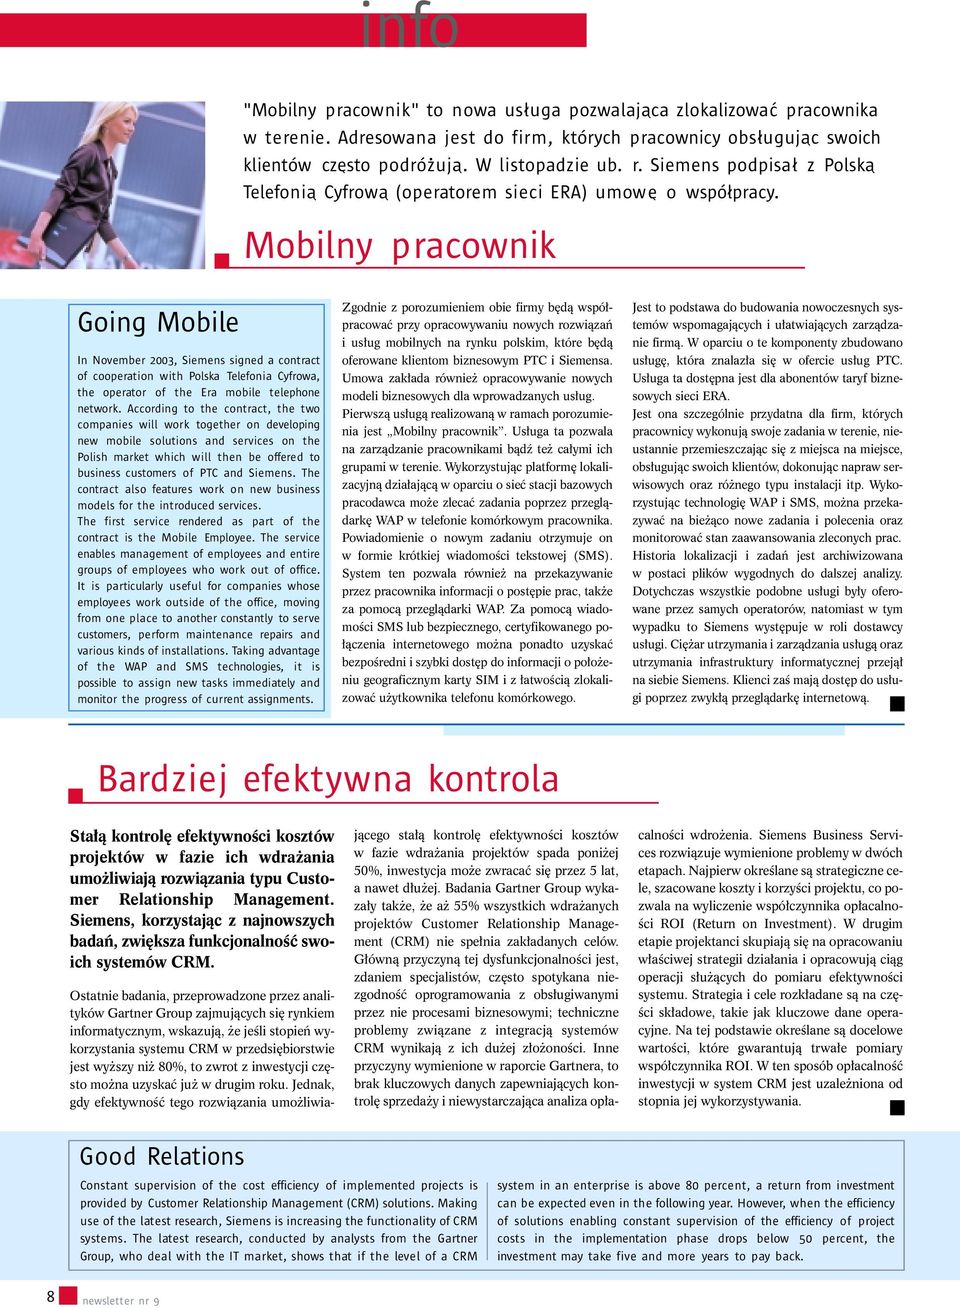 Mobilny pracownik Going Mobile In November 2003,Siemens signed a contract of cooperation with Polska Telefonia Cyfrowa, the operator of the Era mobile telephone network.